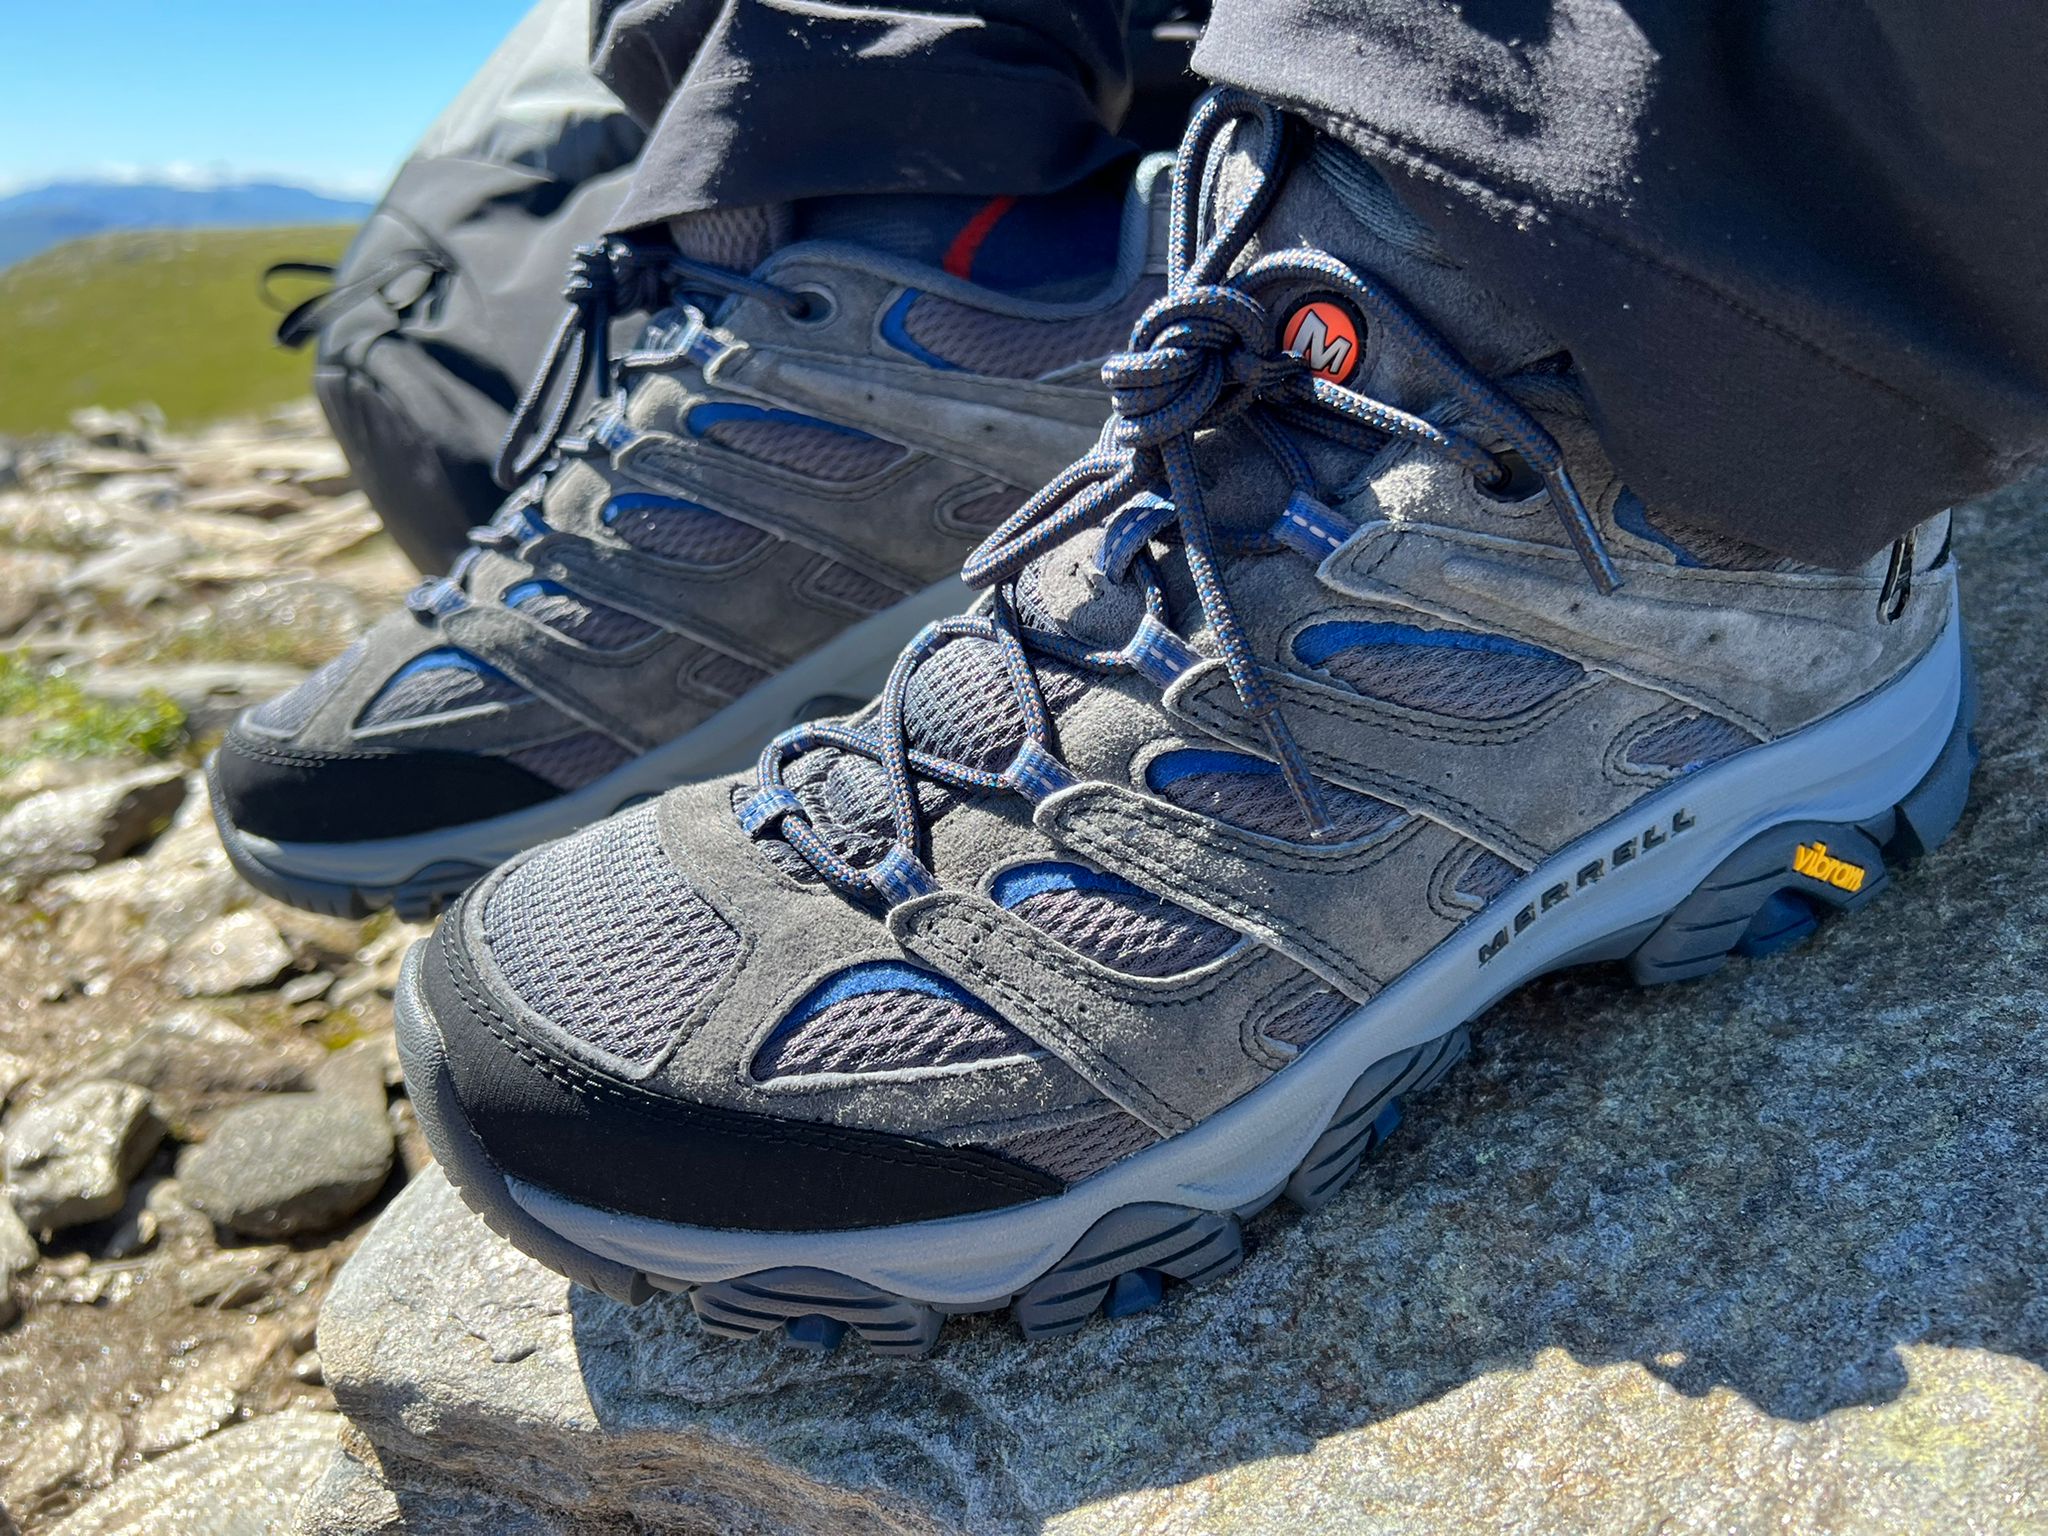 What You Really Get From a Budget Hiking Shoe